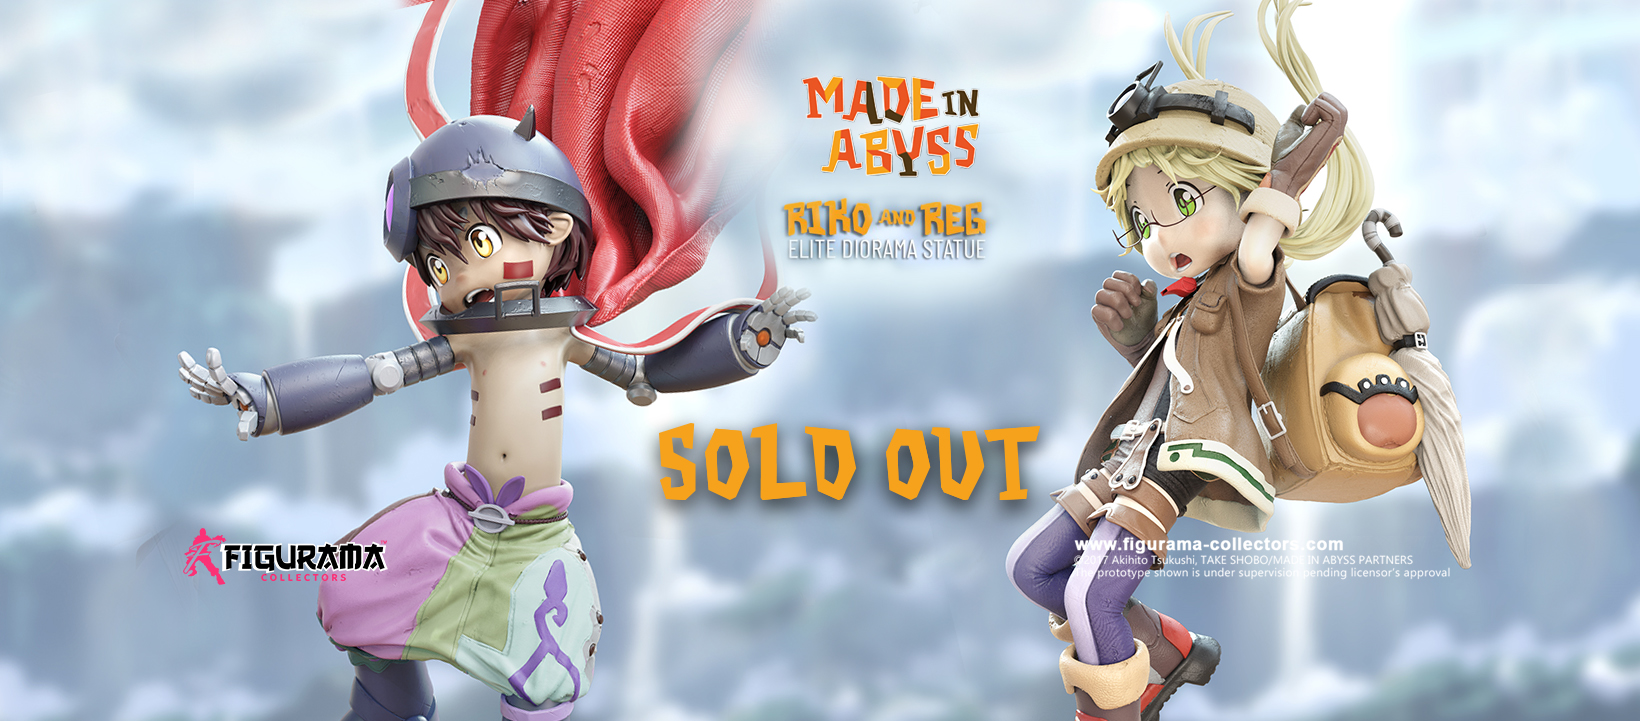 ULTIMATE SELLOUT RECORD! – MADE IN ABYSS SELLS OUT IN LESS THAN 1 HOUR